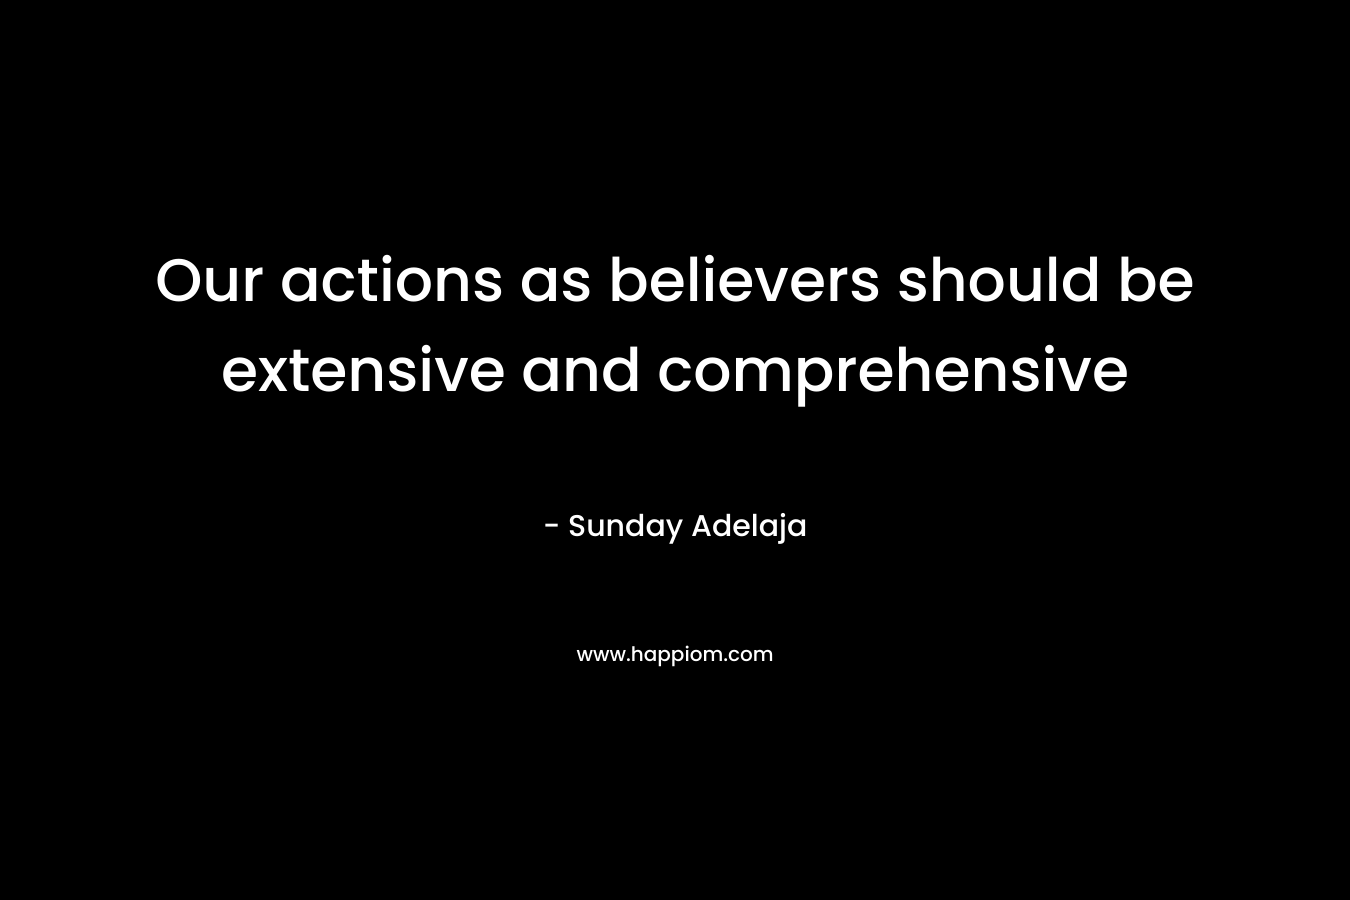 Our actions as believers should be extensive and comprehensive